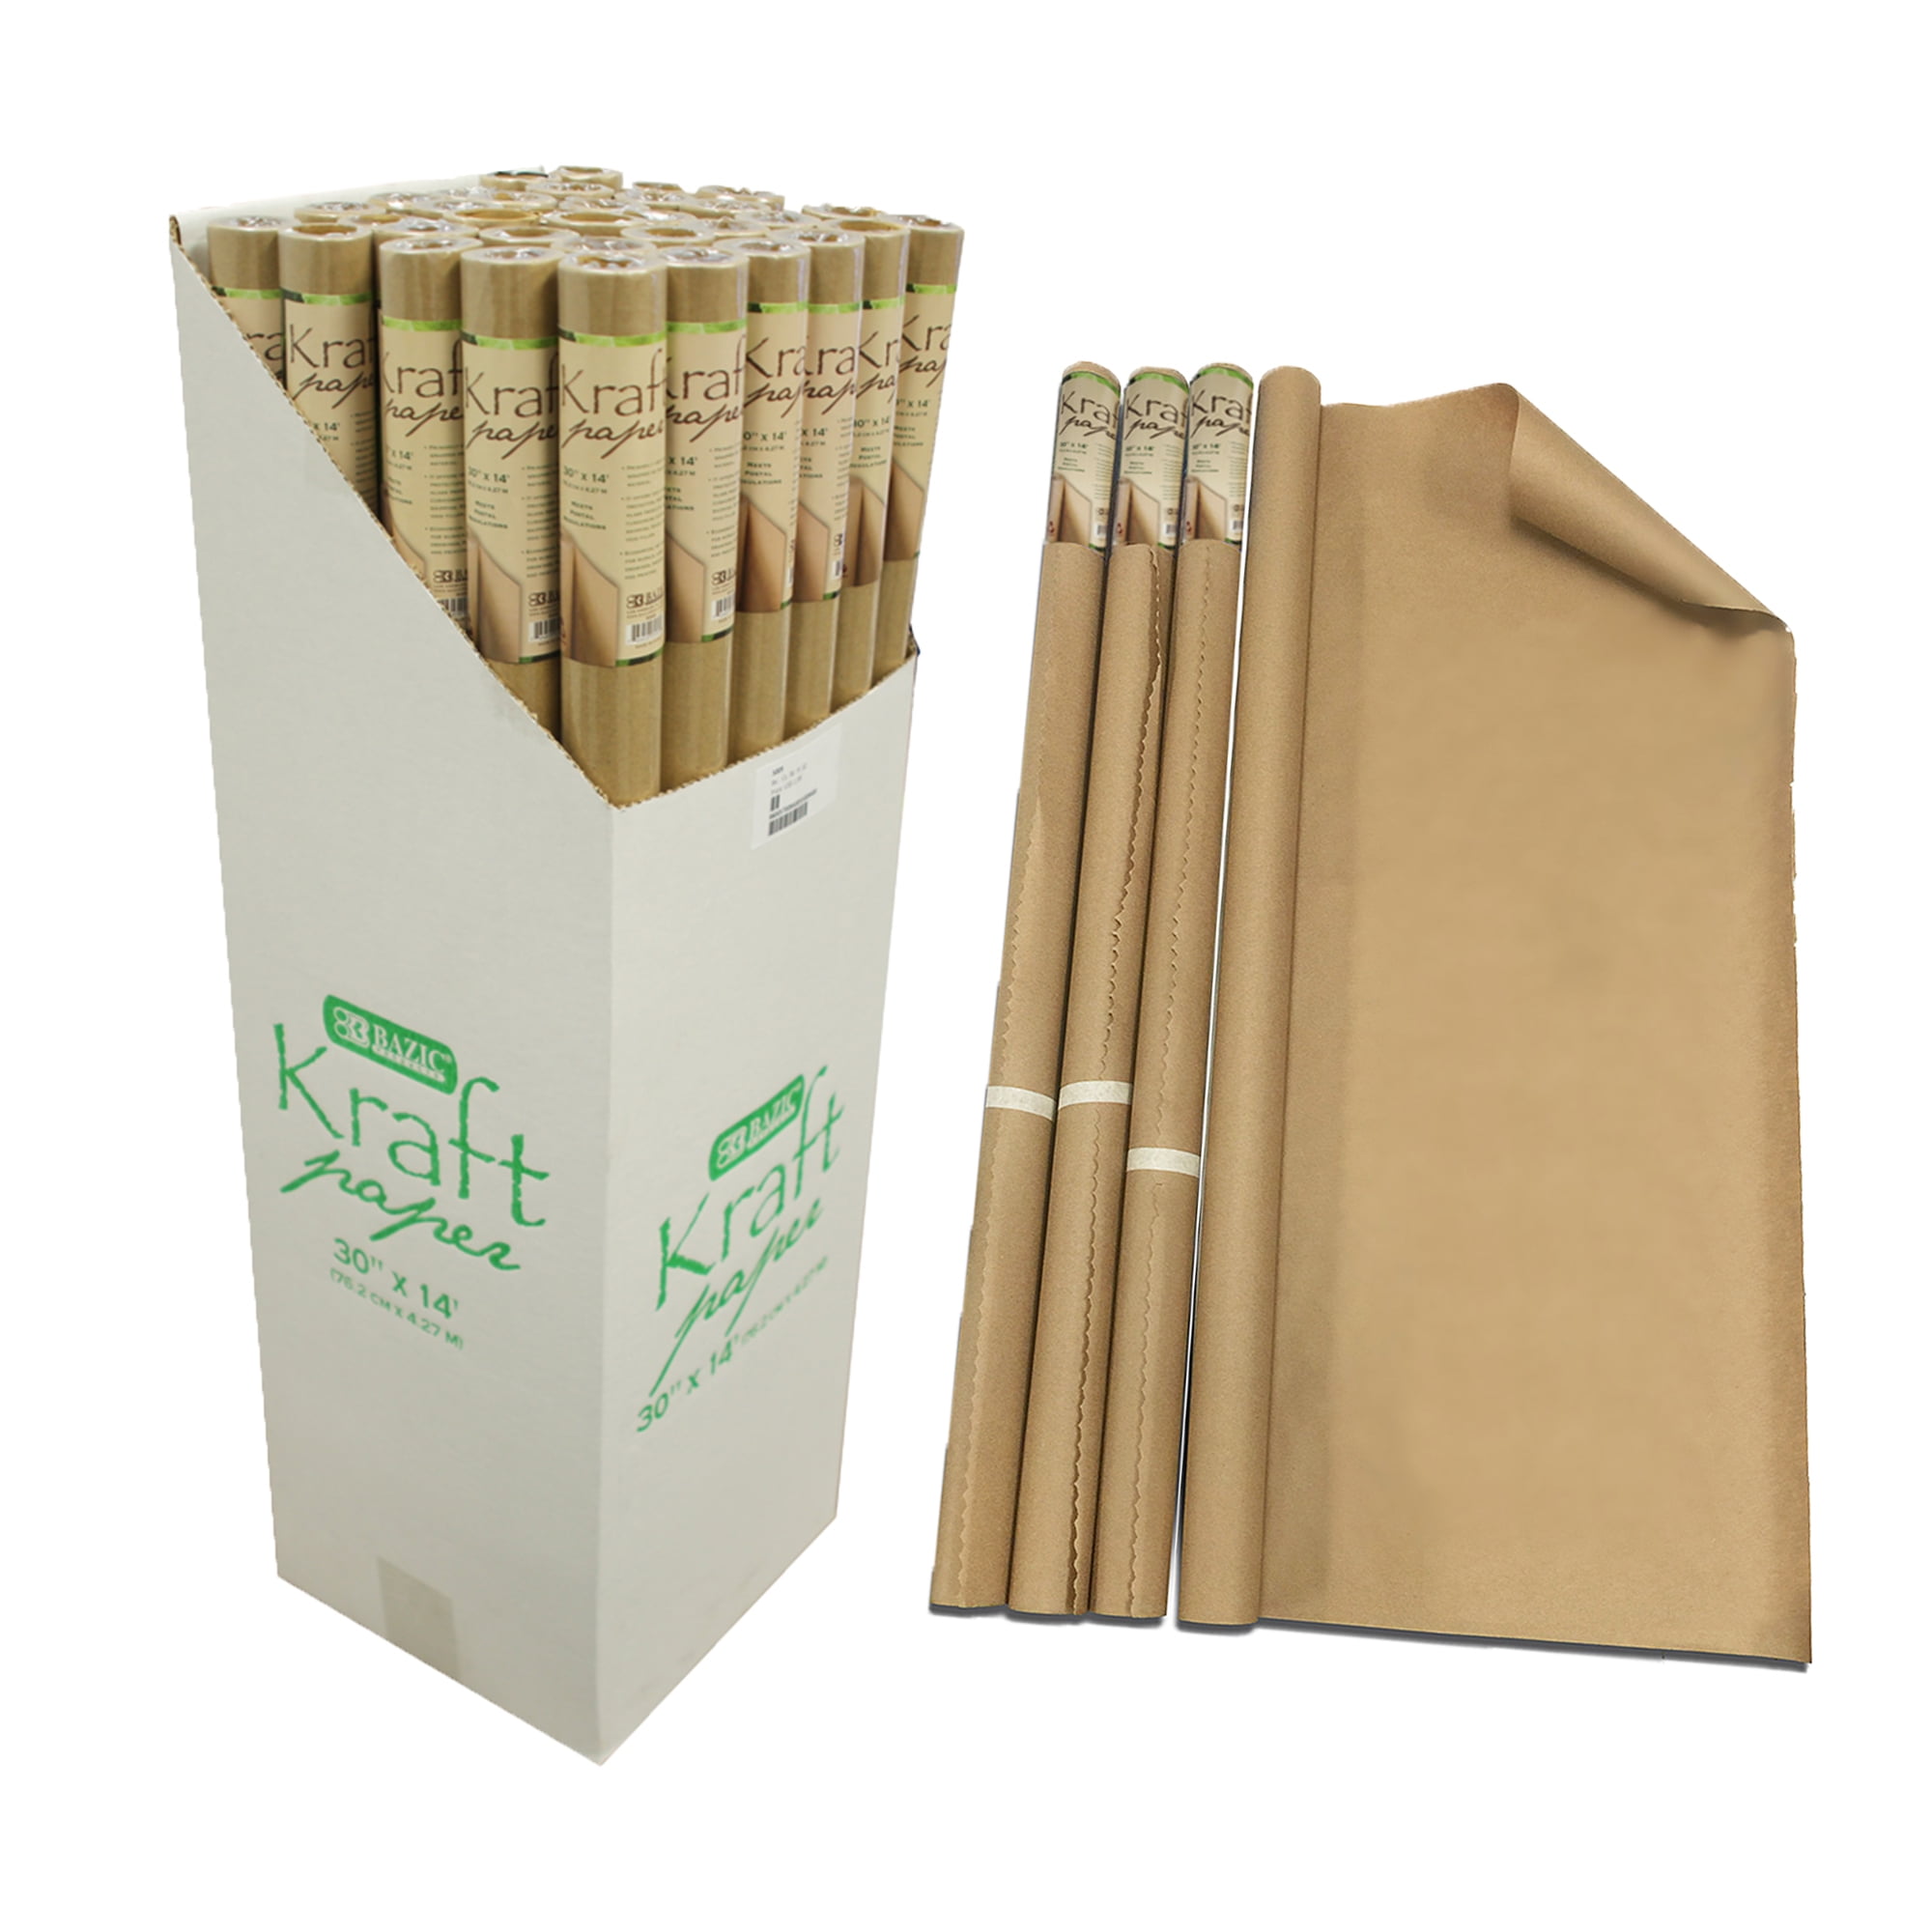  Eco Kraft Wrapping Paper Roll (Jumbo), Biodegradable Recycled  Material, Made in the USA, Multi-use: Natural Wrapping Paper, Table  Runner, Moving, Packing & Shipping